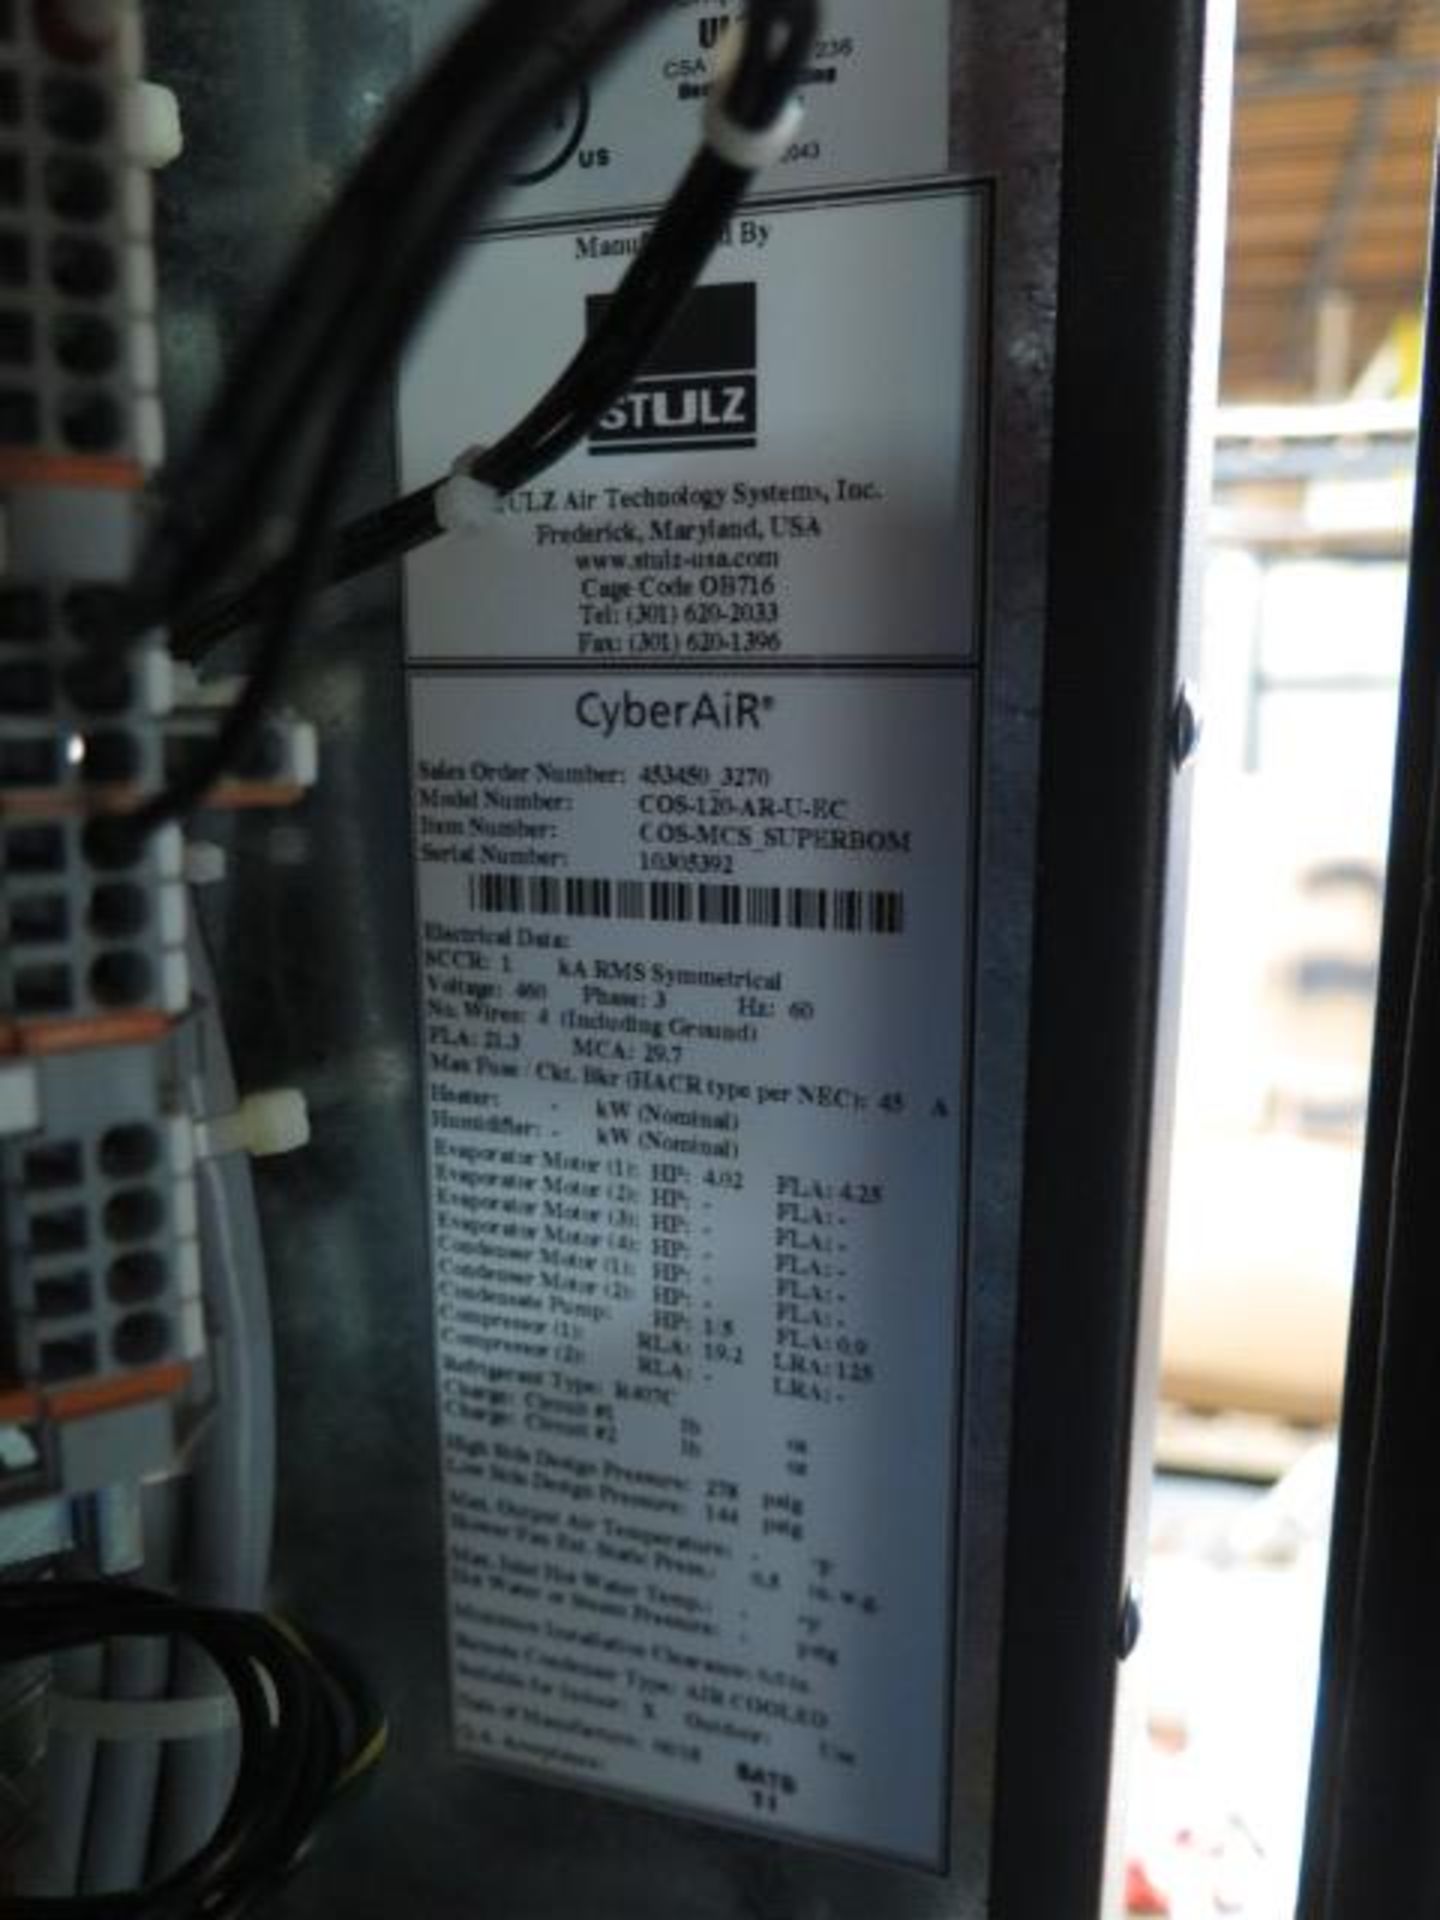 Stulz "Cyber AiR" COS-120-AR-U-EC Control Package (NEW) (SOLD AS-IS - NO WARRANTY) - Image 7 of 7